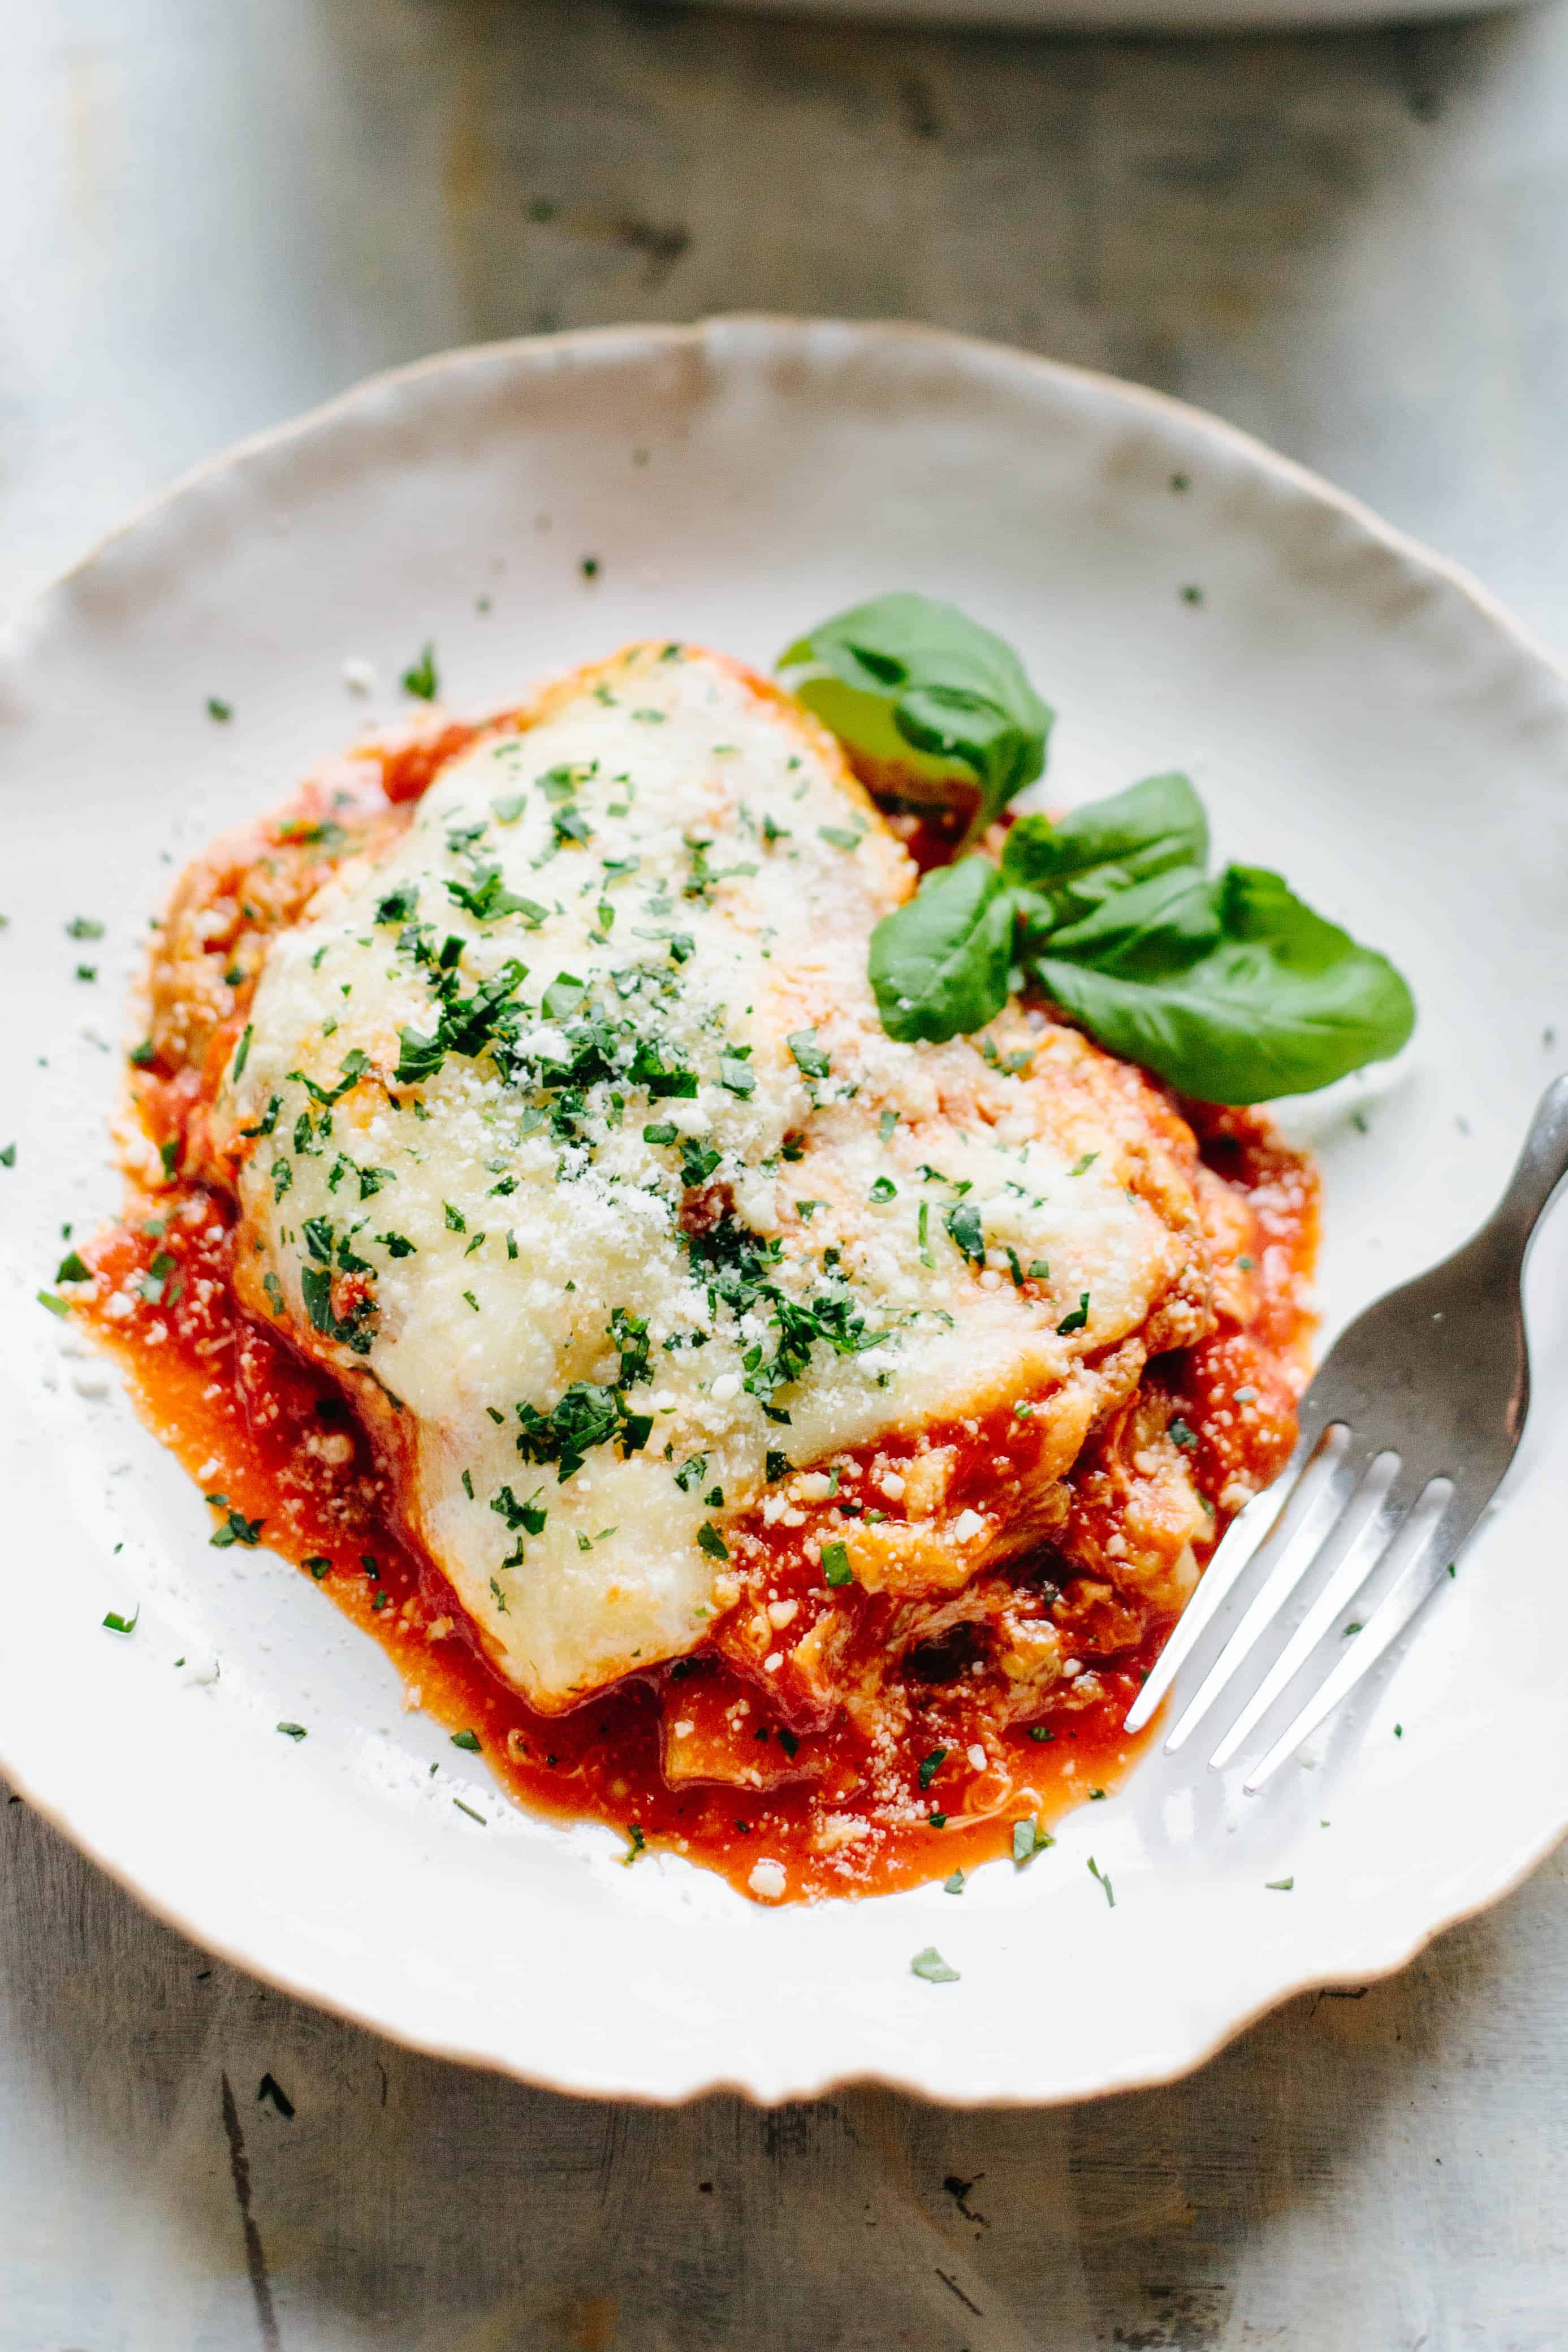 Unbreaded Eggplant Parm is a healthier, gluten free version of my Mom's eggplant parm that's actually more authentic than the original! Made with baked eggplant that isn't coated in any breading, which is how they prepare it on the Amalfi Coast in Italy! #glutenfree #eggplant #parmesan #authentic #Italian #recipe | ColeyCooks.com